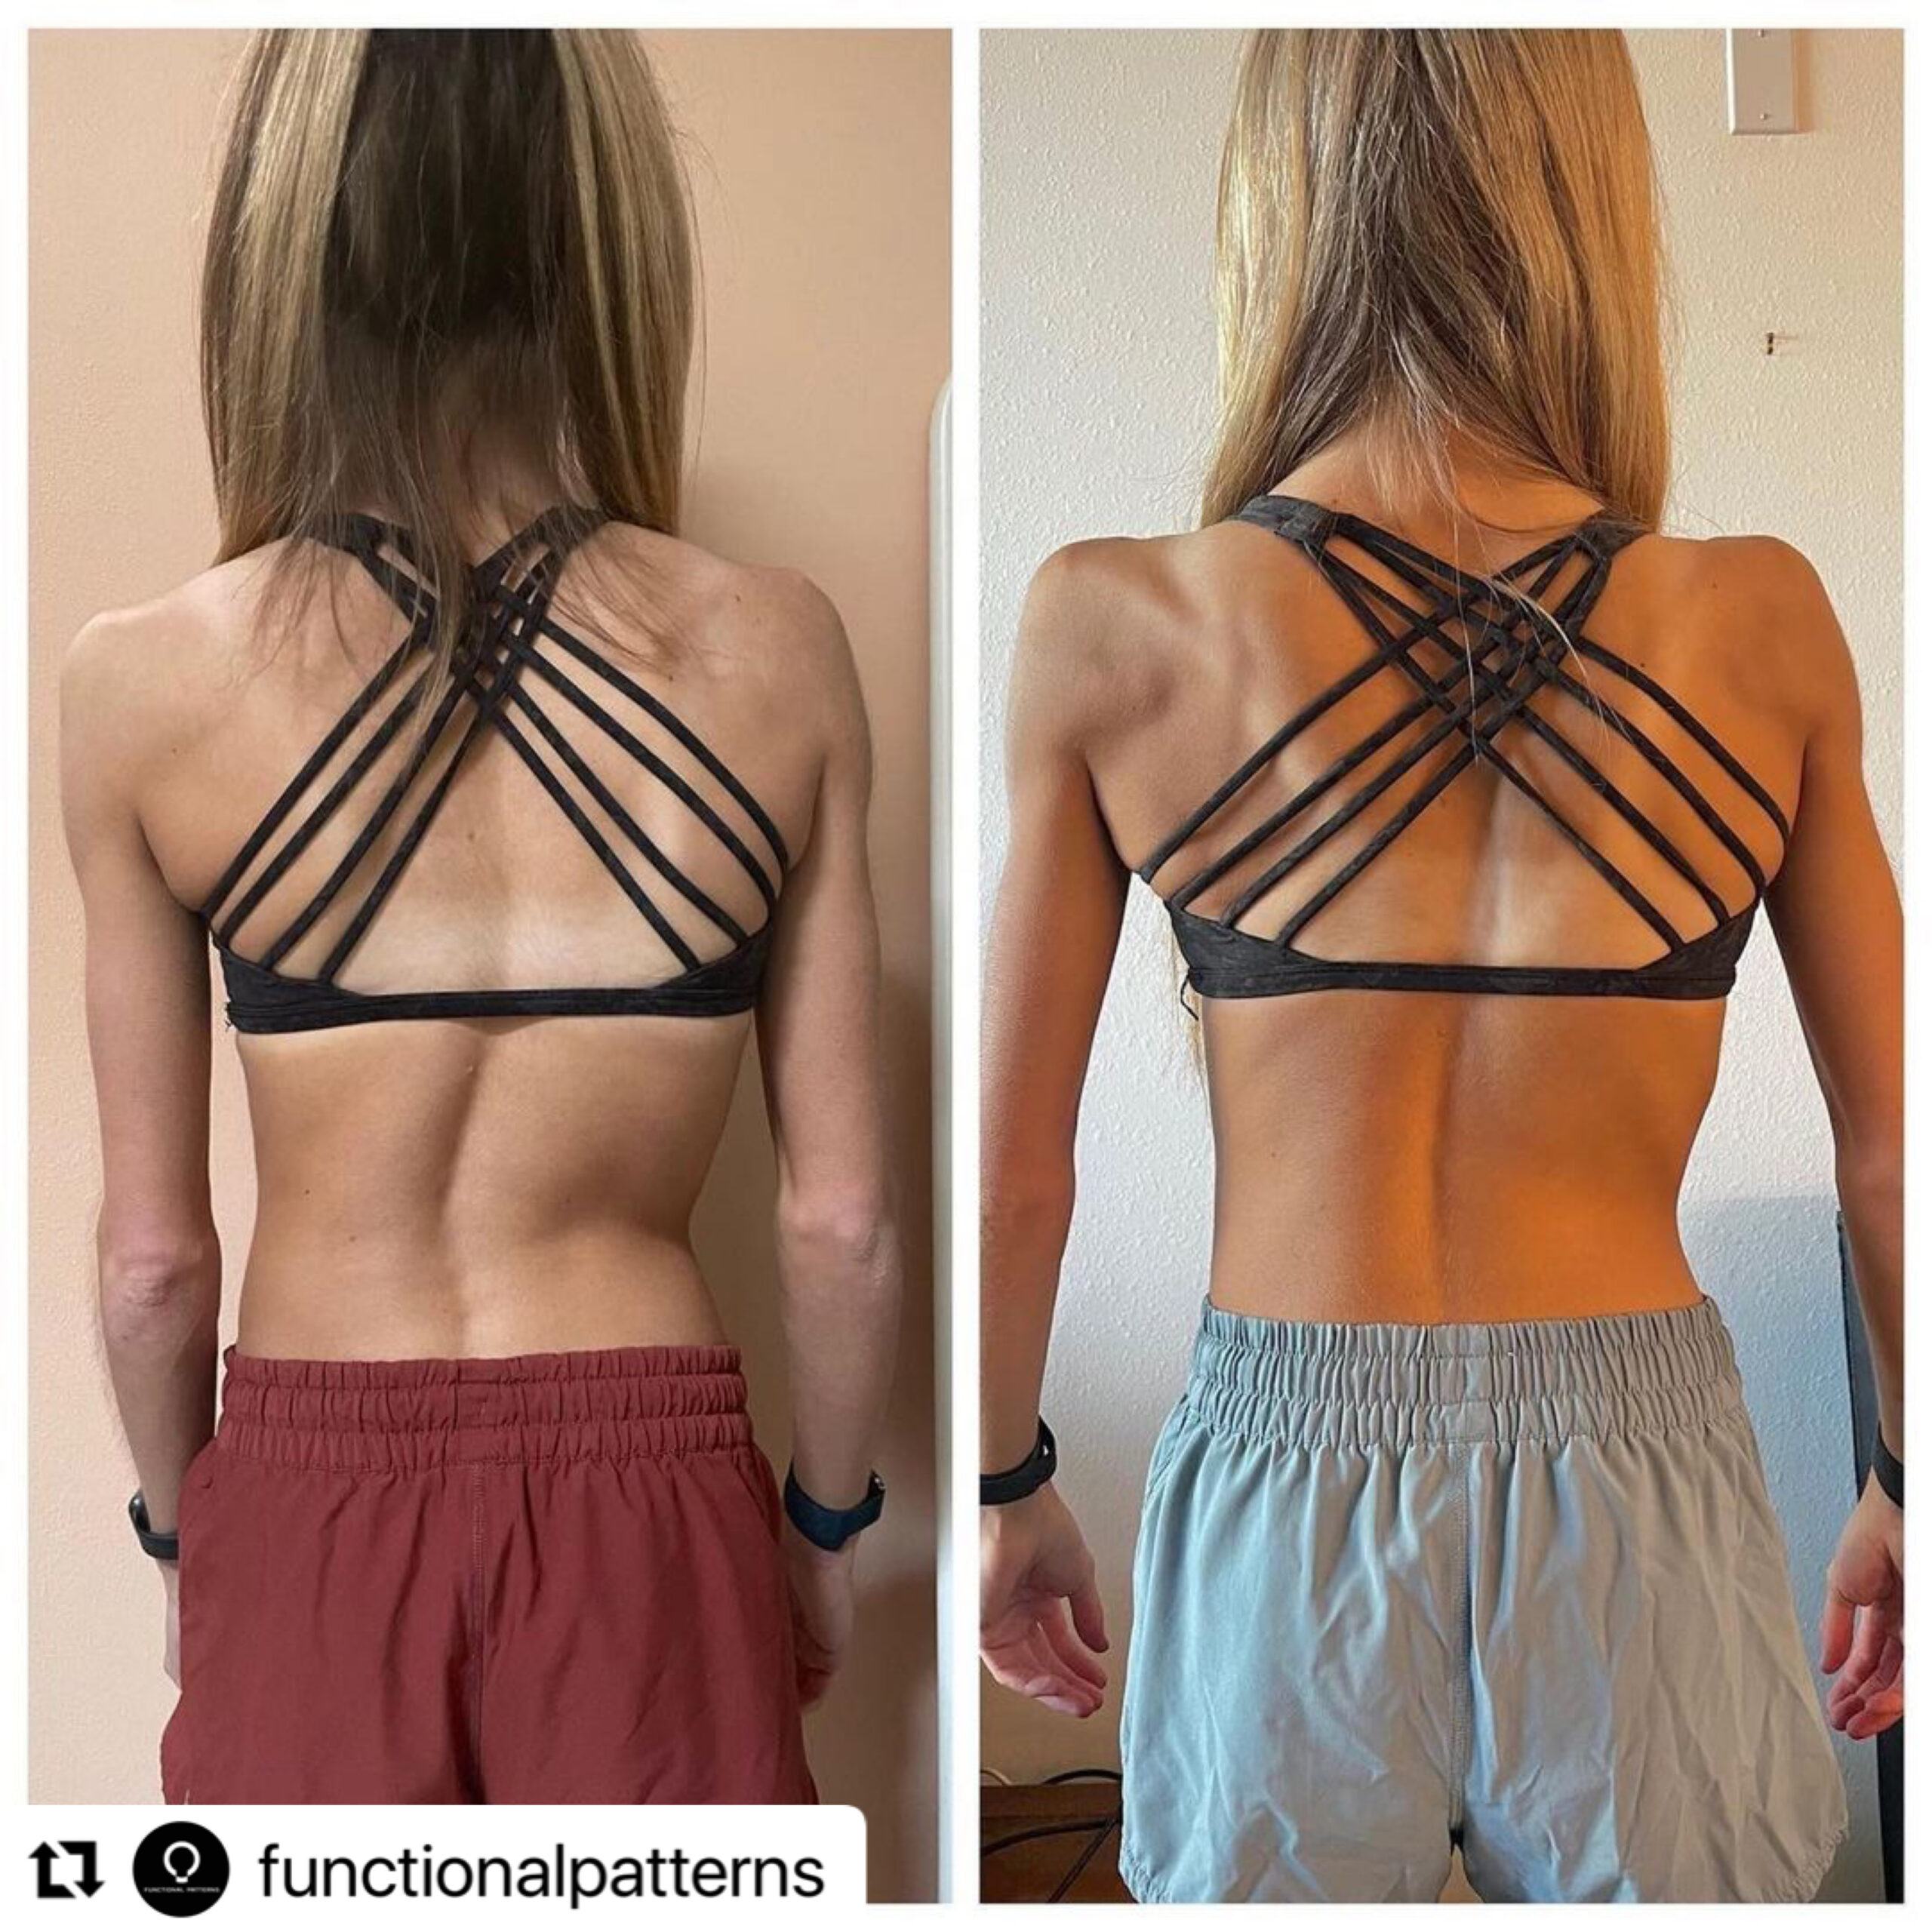 Functional Patterns Scoliosis Results